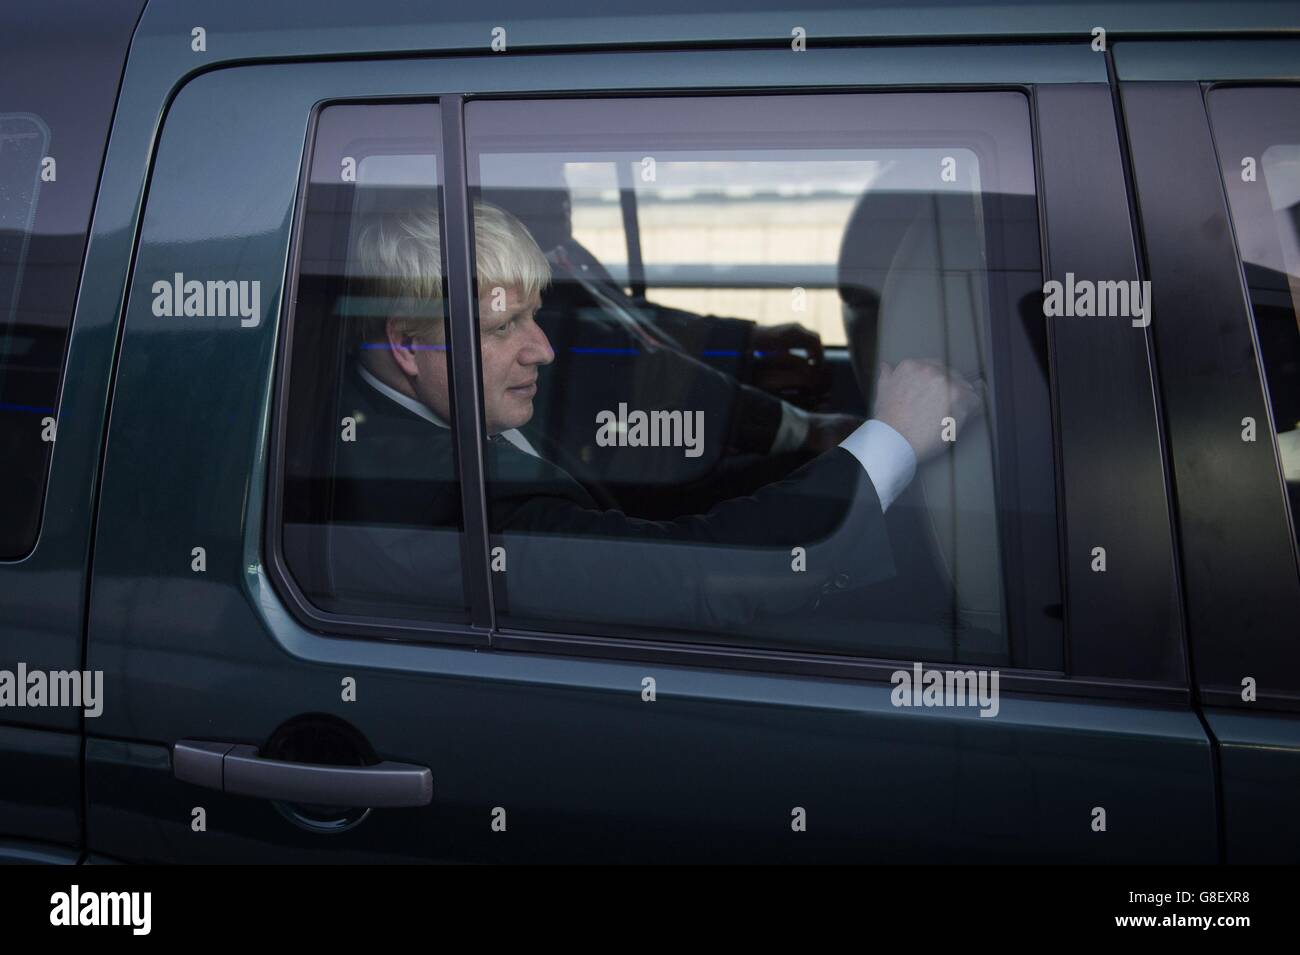 Mayor of London Boris Johnson leaves Ramallah in Palestine as his visit to the West Bank was cut short after organisers cancelled meetings and accused him of adopting a "misinformed and disrespectful" pro-Israel stance. Stock Photo